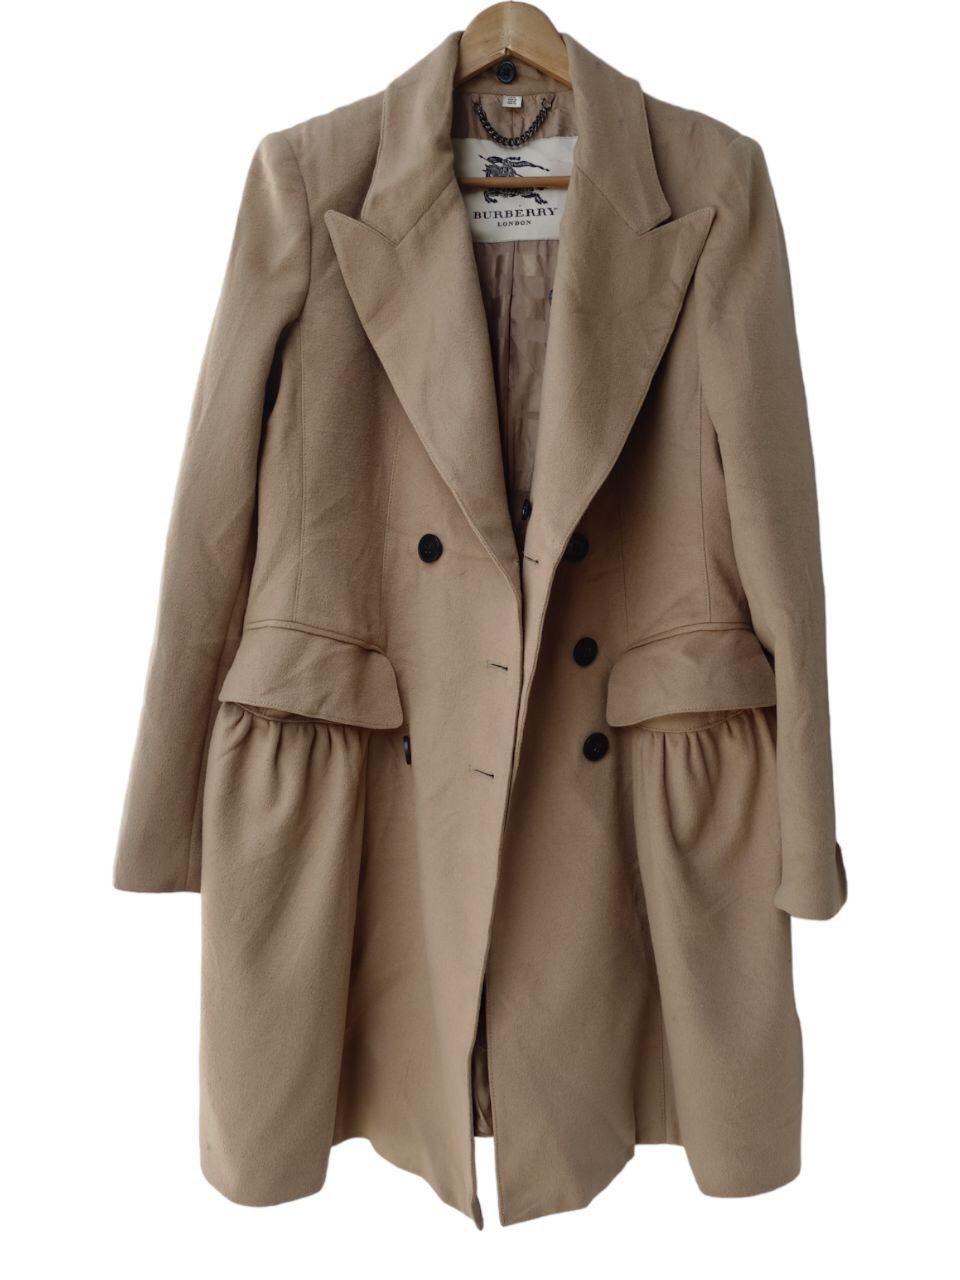 Burberry Burberry London Double Breasted Virgin Wool Coat Size XL / US 12-14 / IT 48-50 - 2 Preview